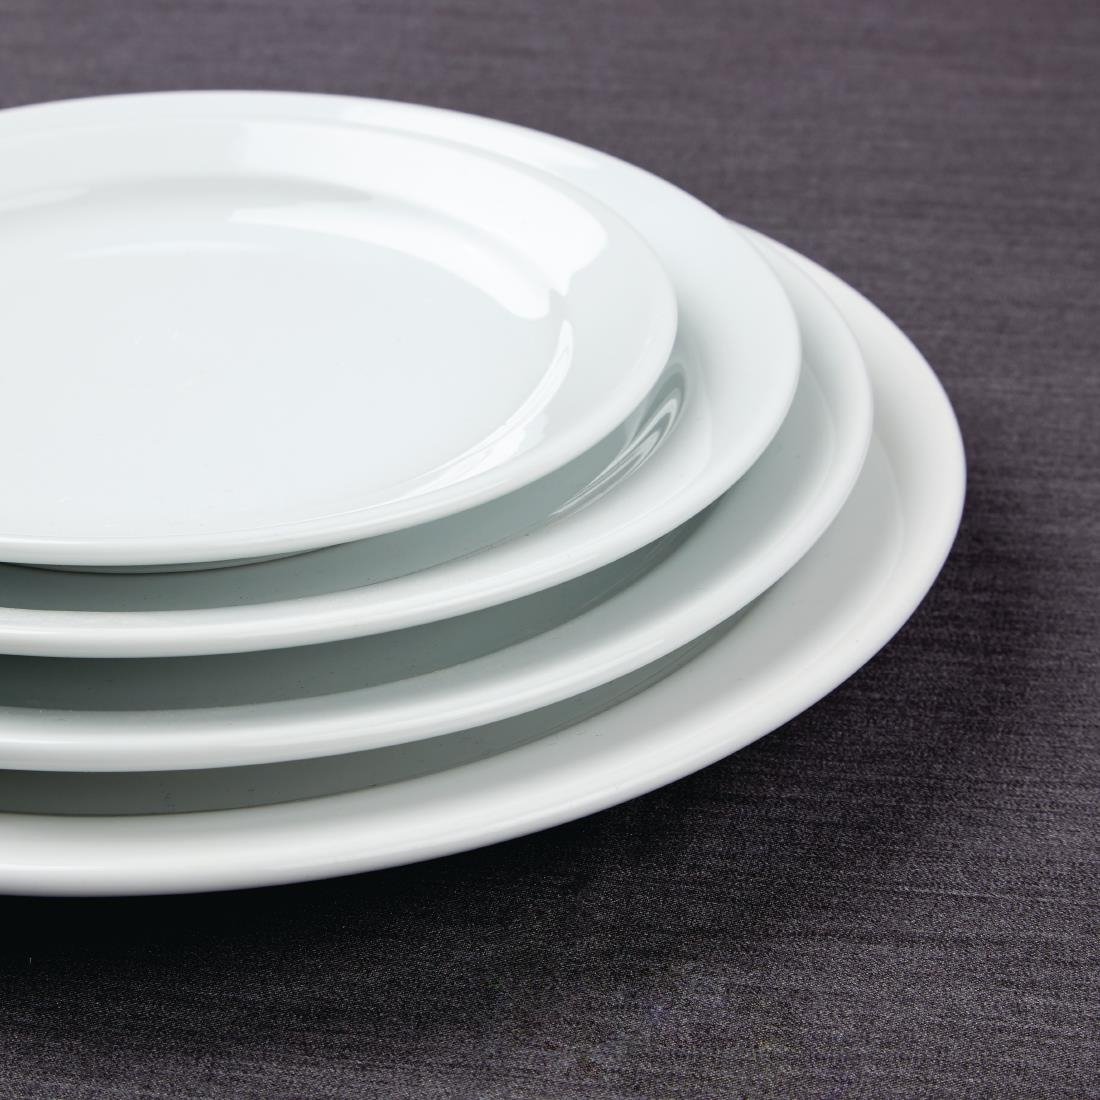 Athena Hotelware Narrow Rimmed Plates 254mm (Pack of 12) JD Catering Equipment Solutions Ltd